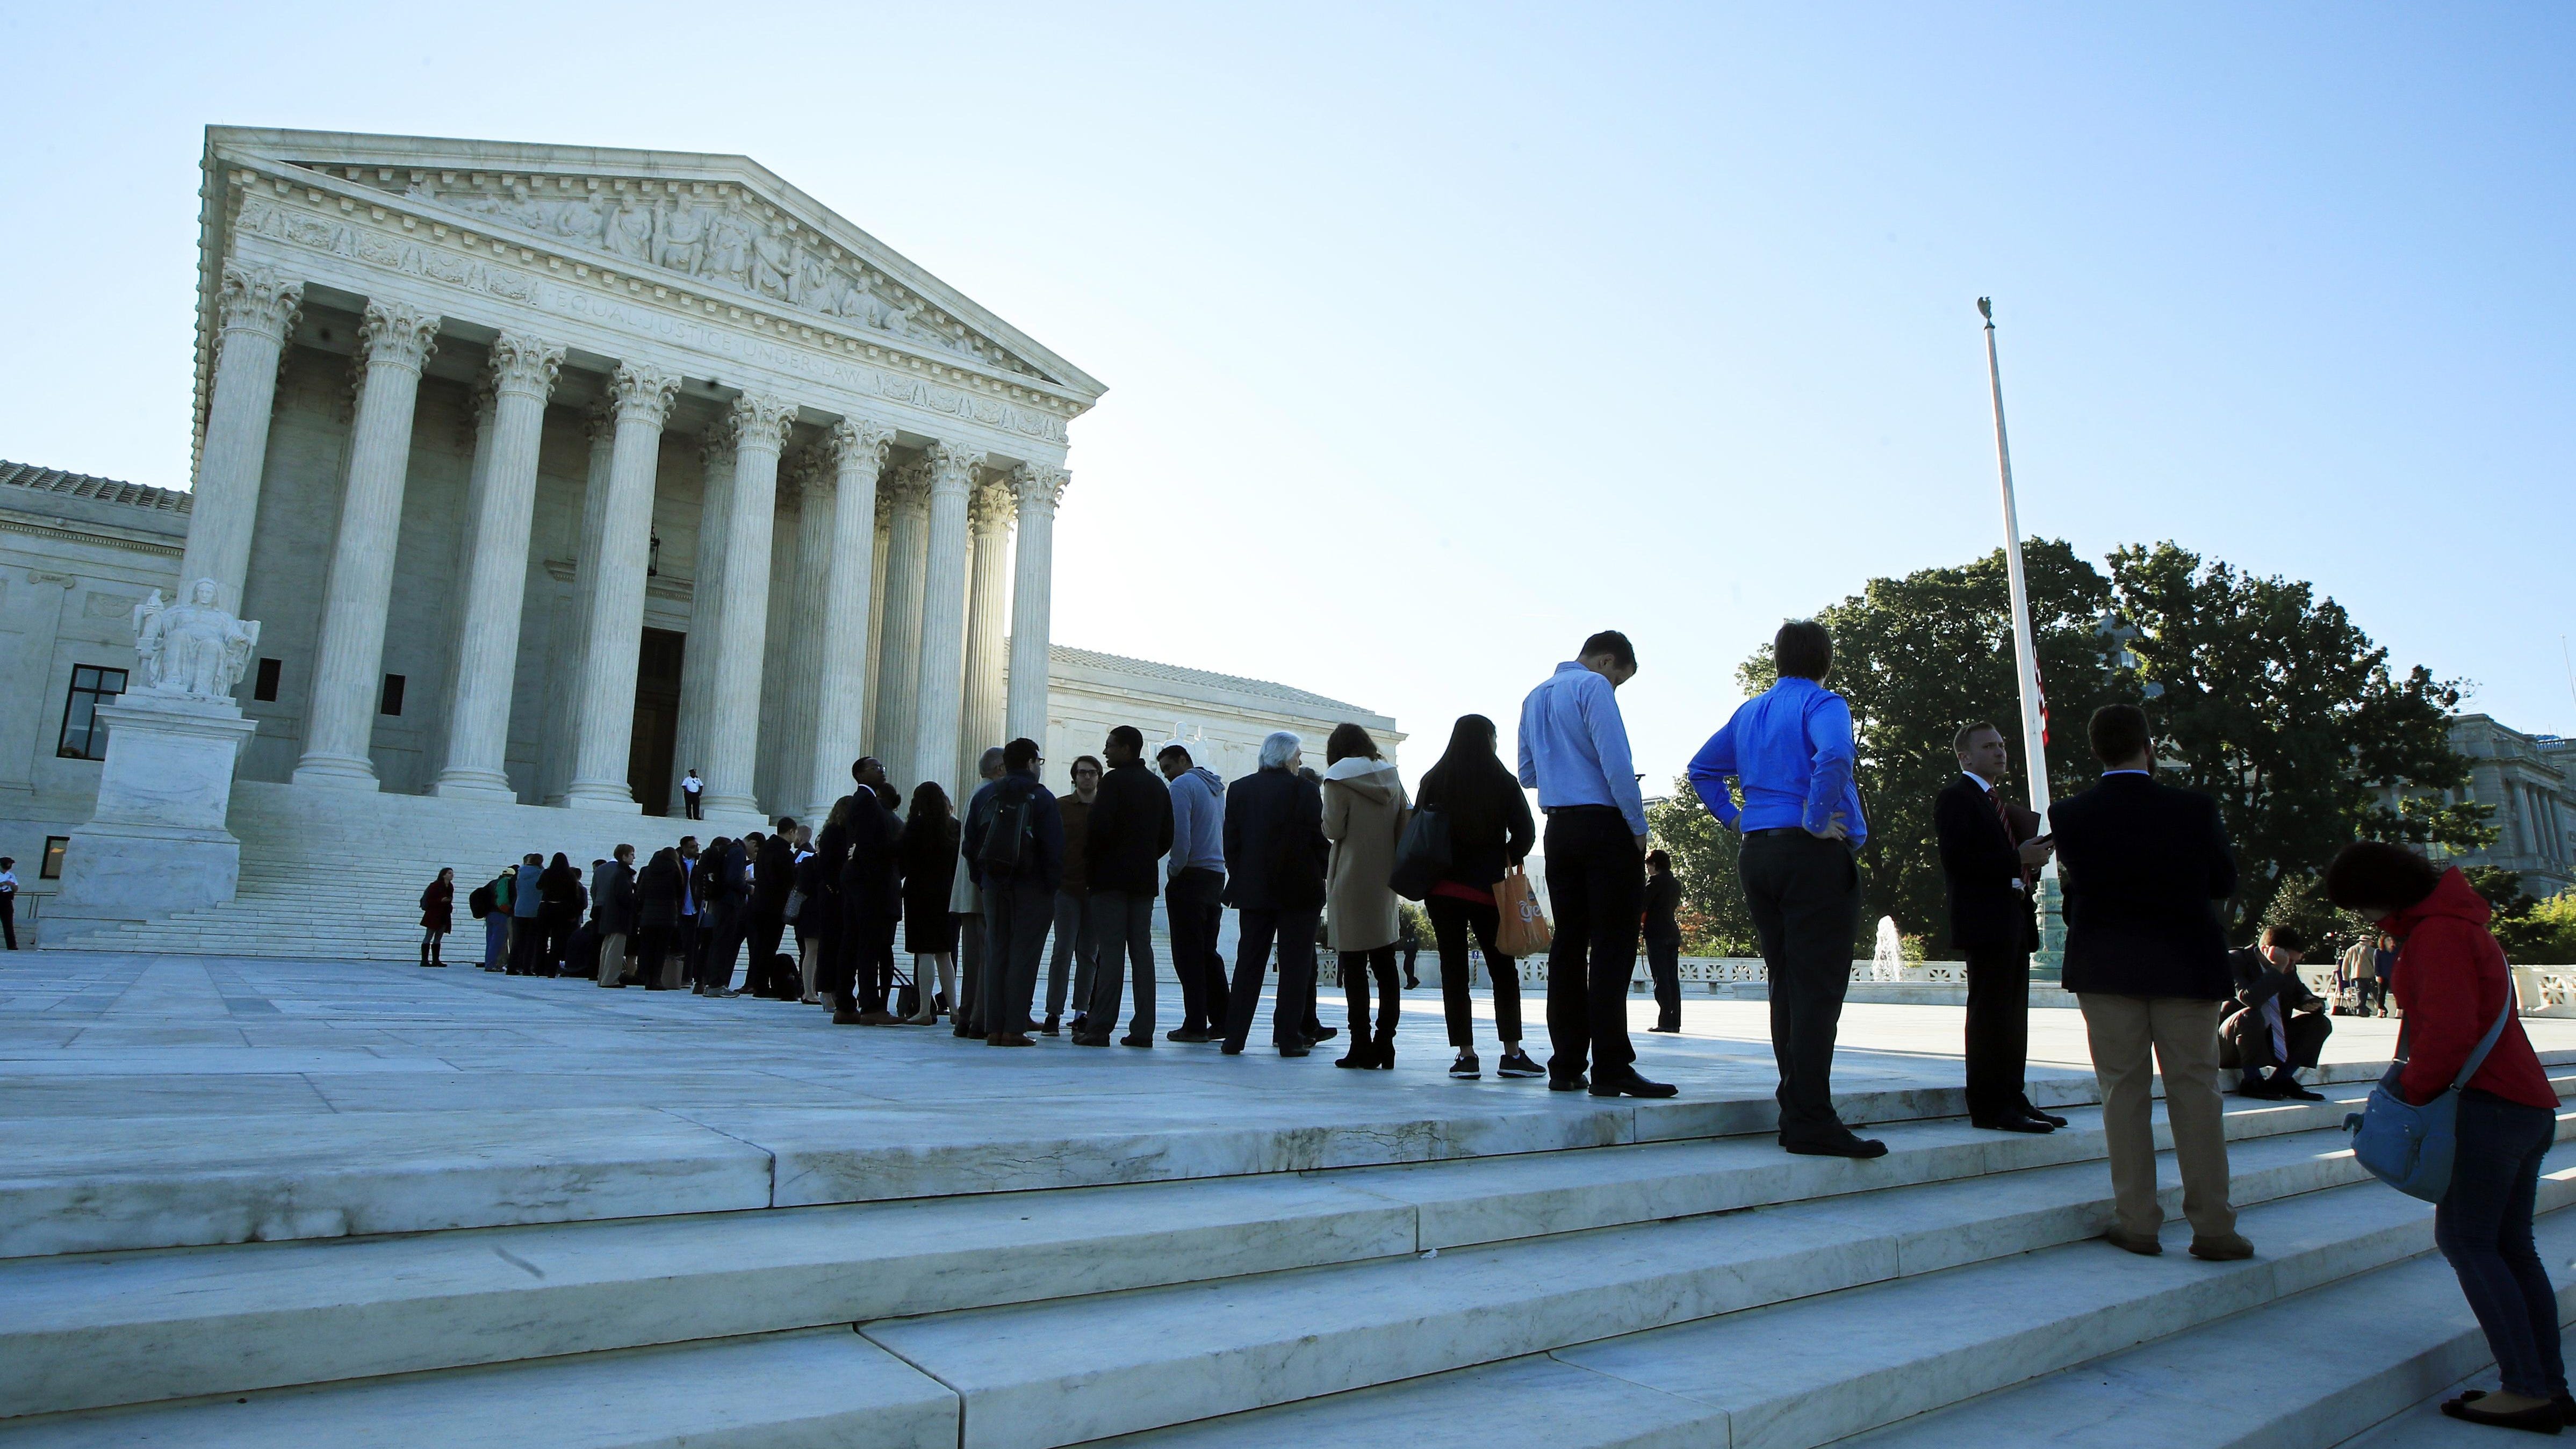 FILE - In this Oct. 3, 2017, file photo, people line up outside the U.S. Supreme Court in Washington to hear arguments in a case about political maps in Wisconsin that could affect elections across the country. The justices ruled against Wisconsin Democrats who challenged legislative districts that gave Republicans a huge edge in the state legislature. (AP Photo/Manuel Balce Ceneta, File)